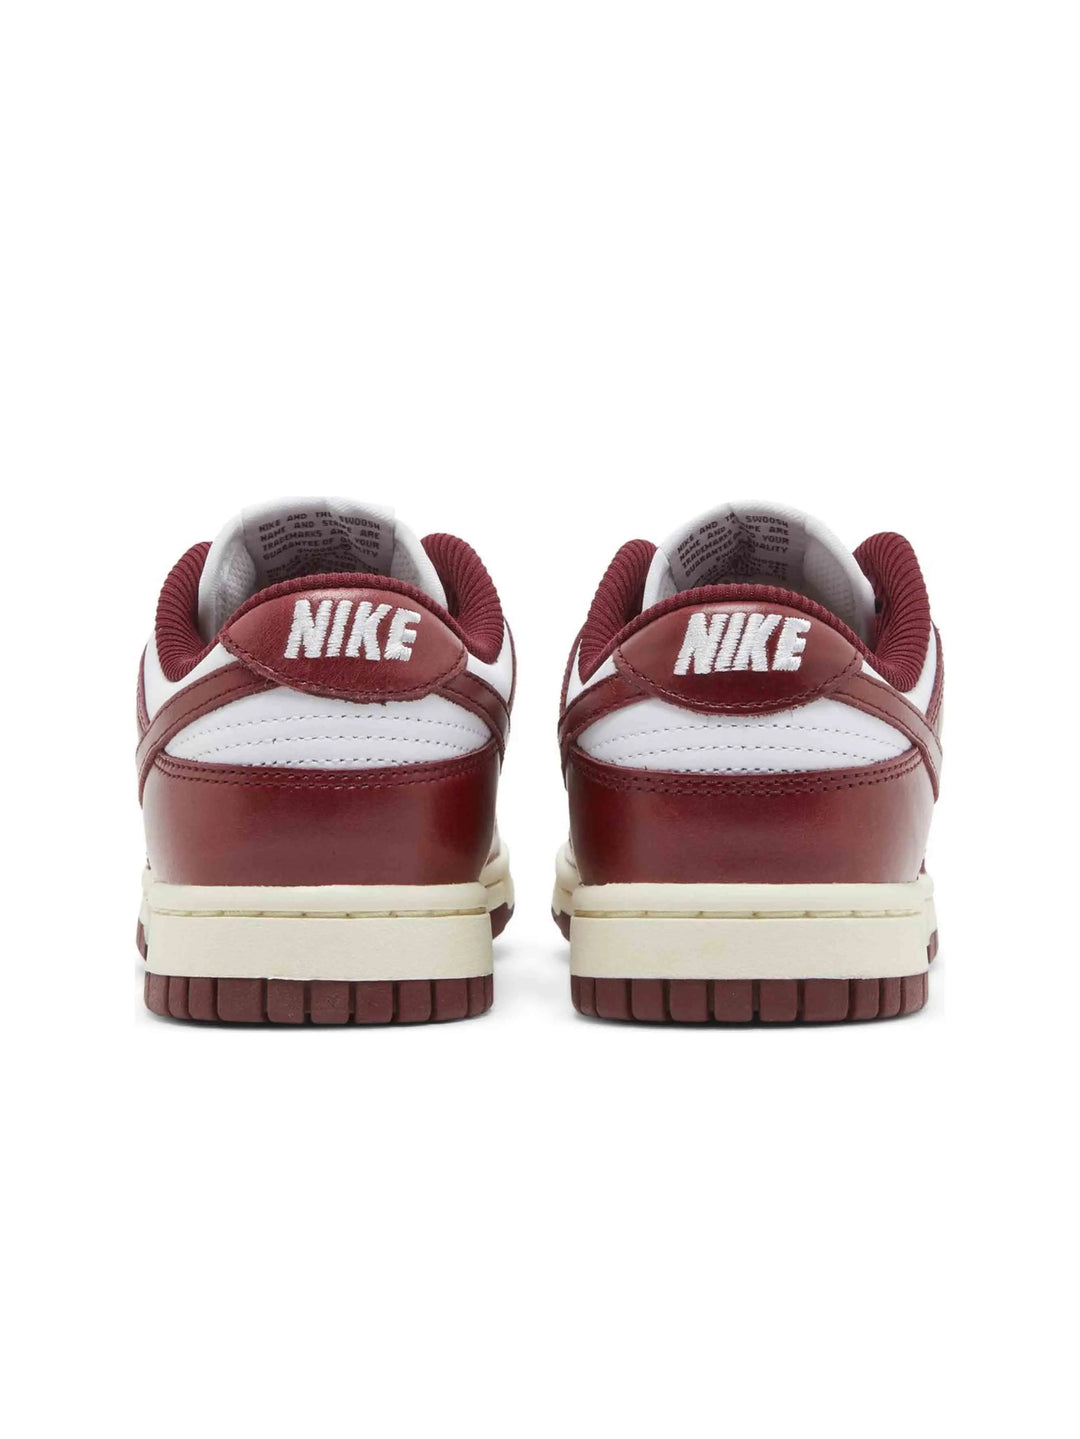 Nike Dunk Low PRM Team Red (W) Prior